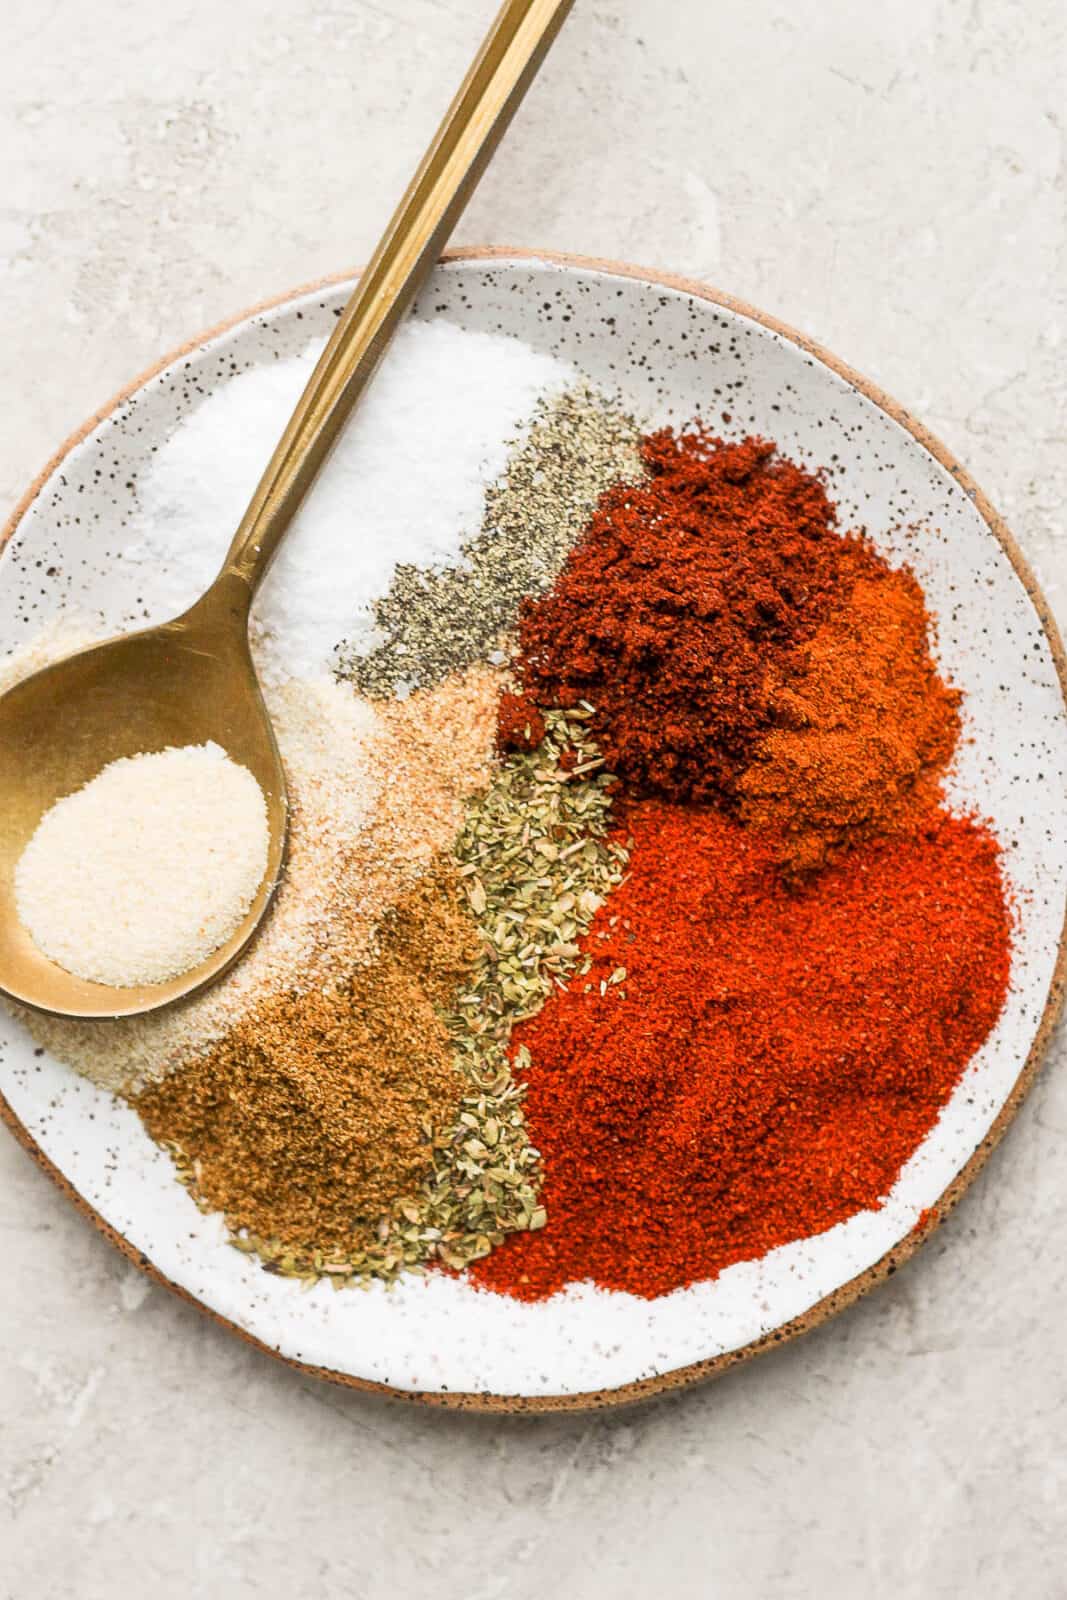 All ingredients for chipotle seasoning on a plate with a spoon.